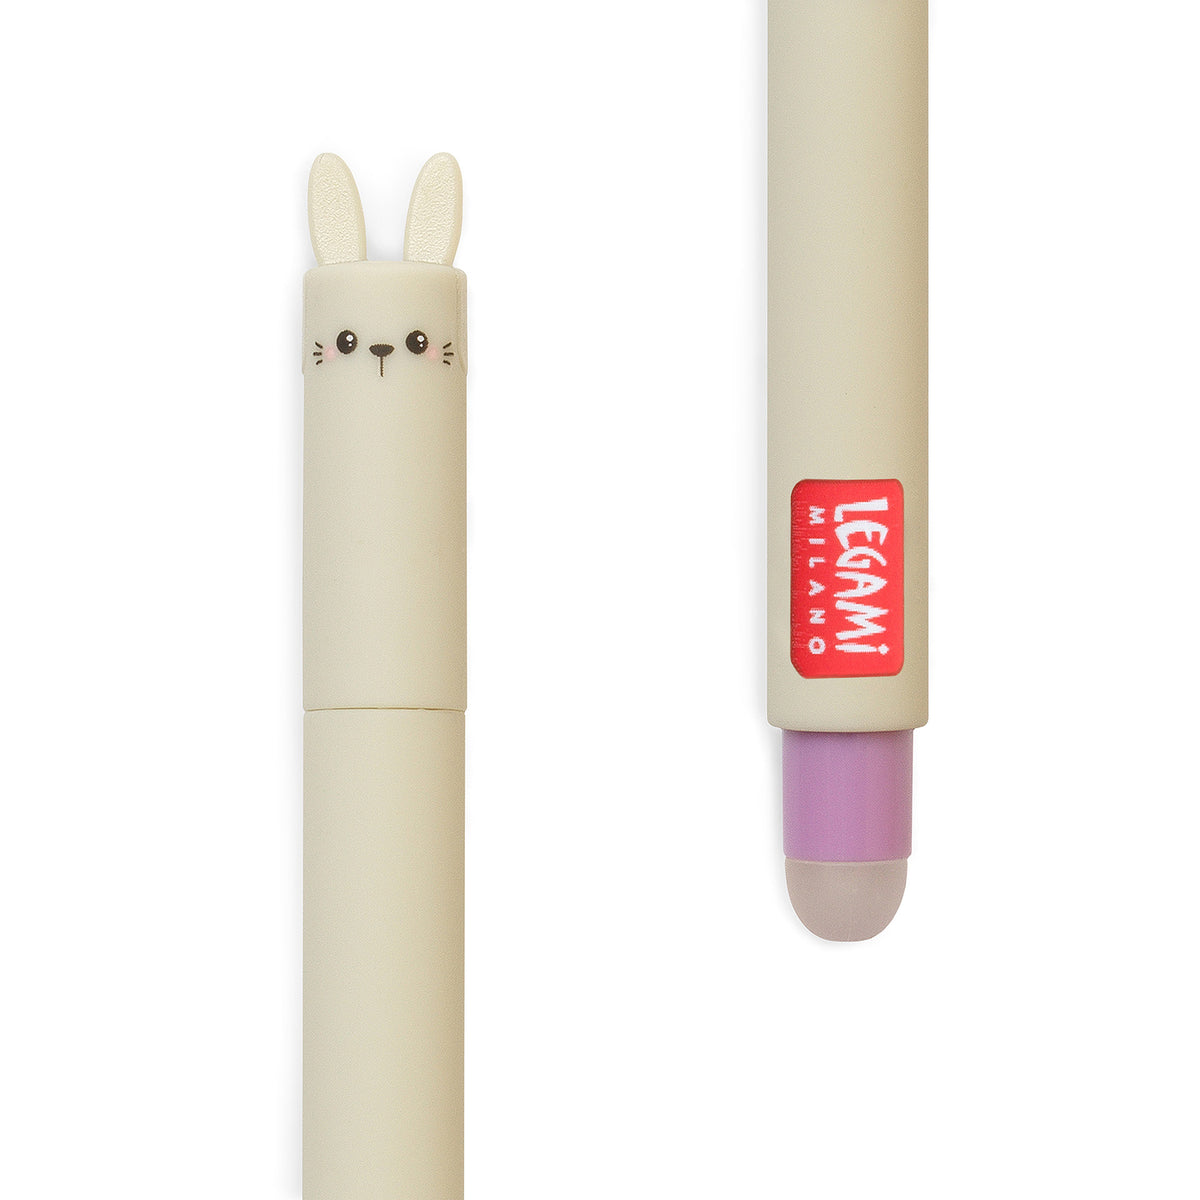 Image of an erasable pen lid and rubber in the shape of a bunny.